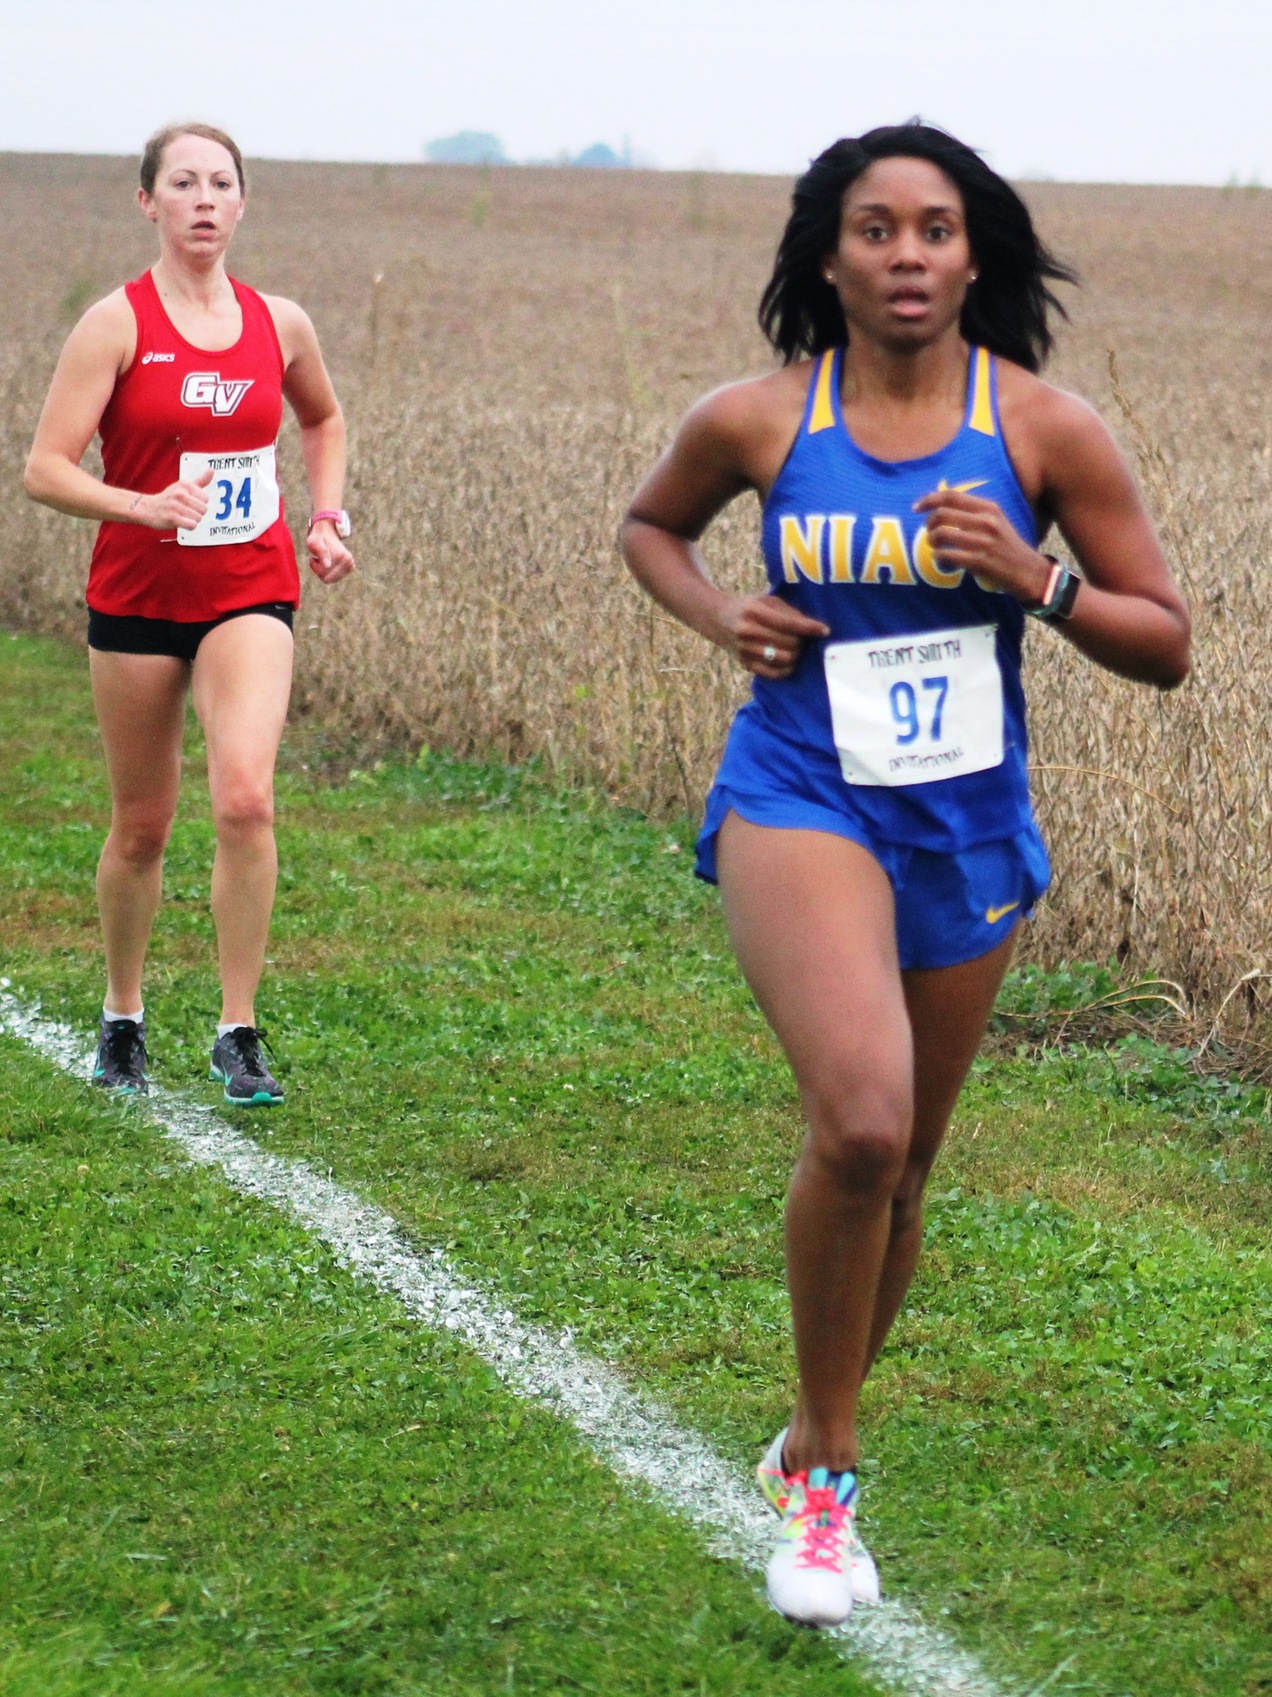 NIACC's Keisha Gonzague runs at the Trent Smith Invitational on Oct. 13. Gonzague was an honorable mention all-region performer in 2016.